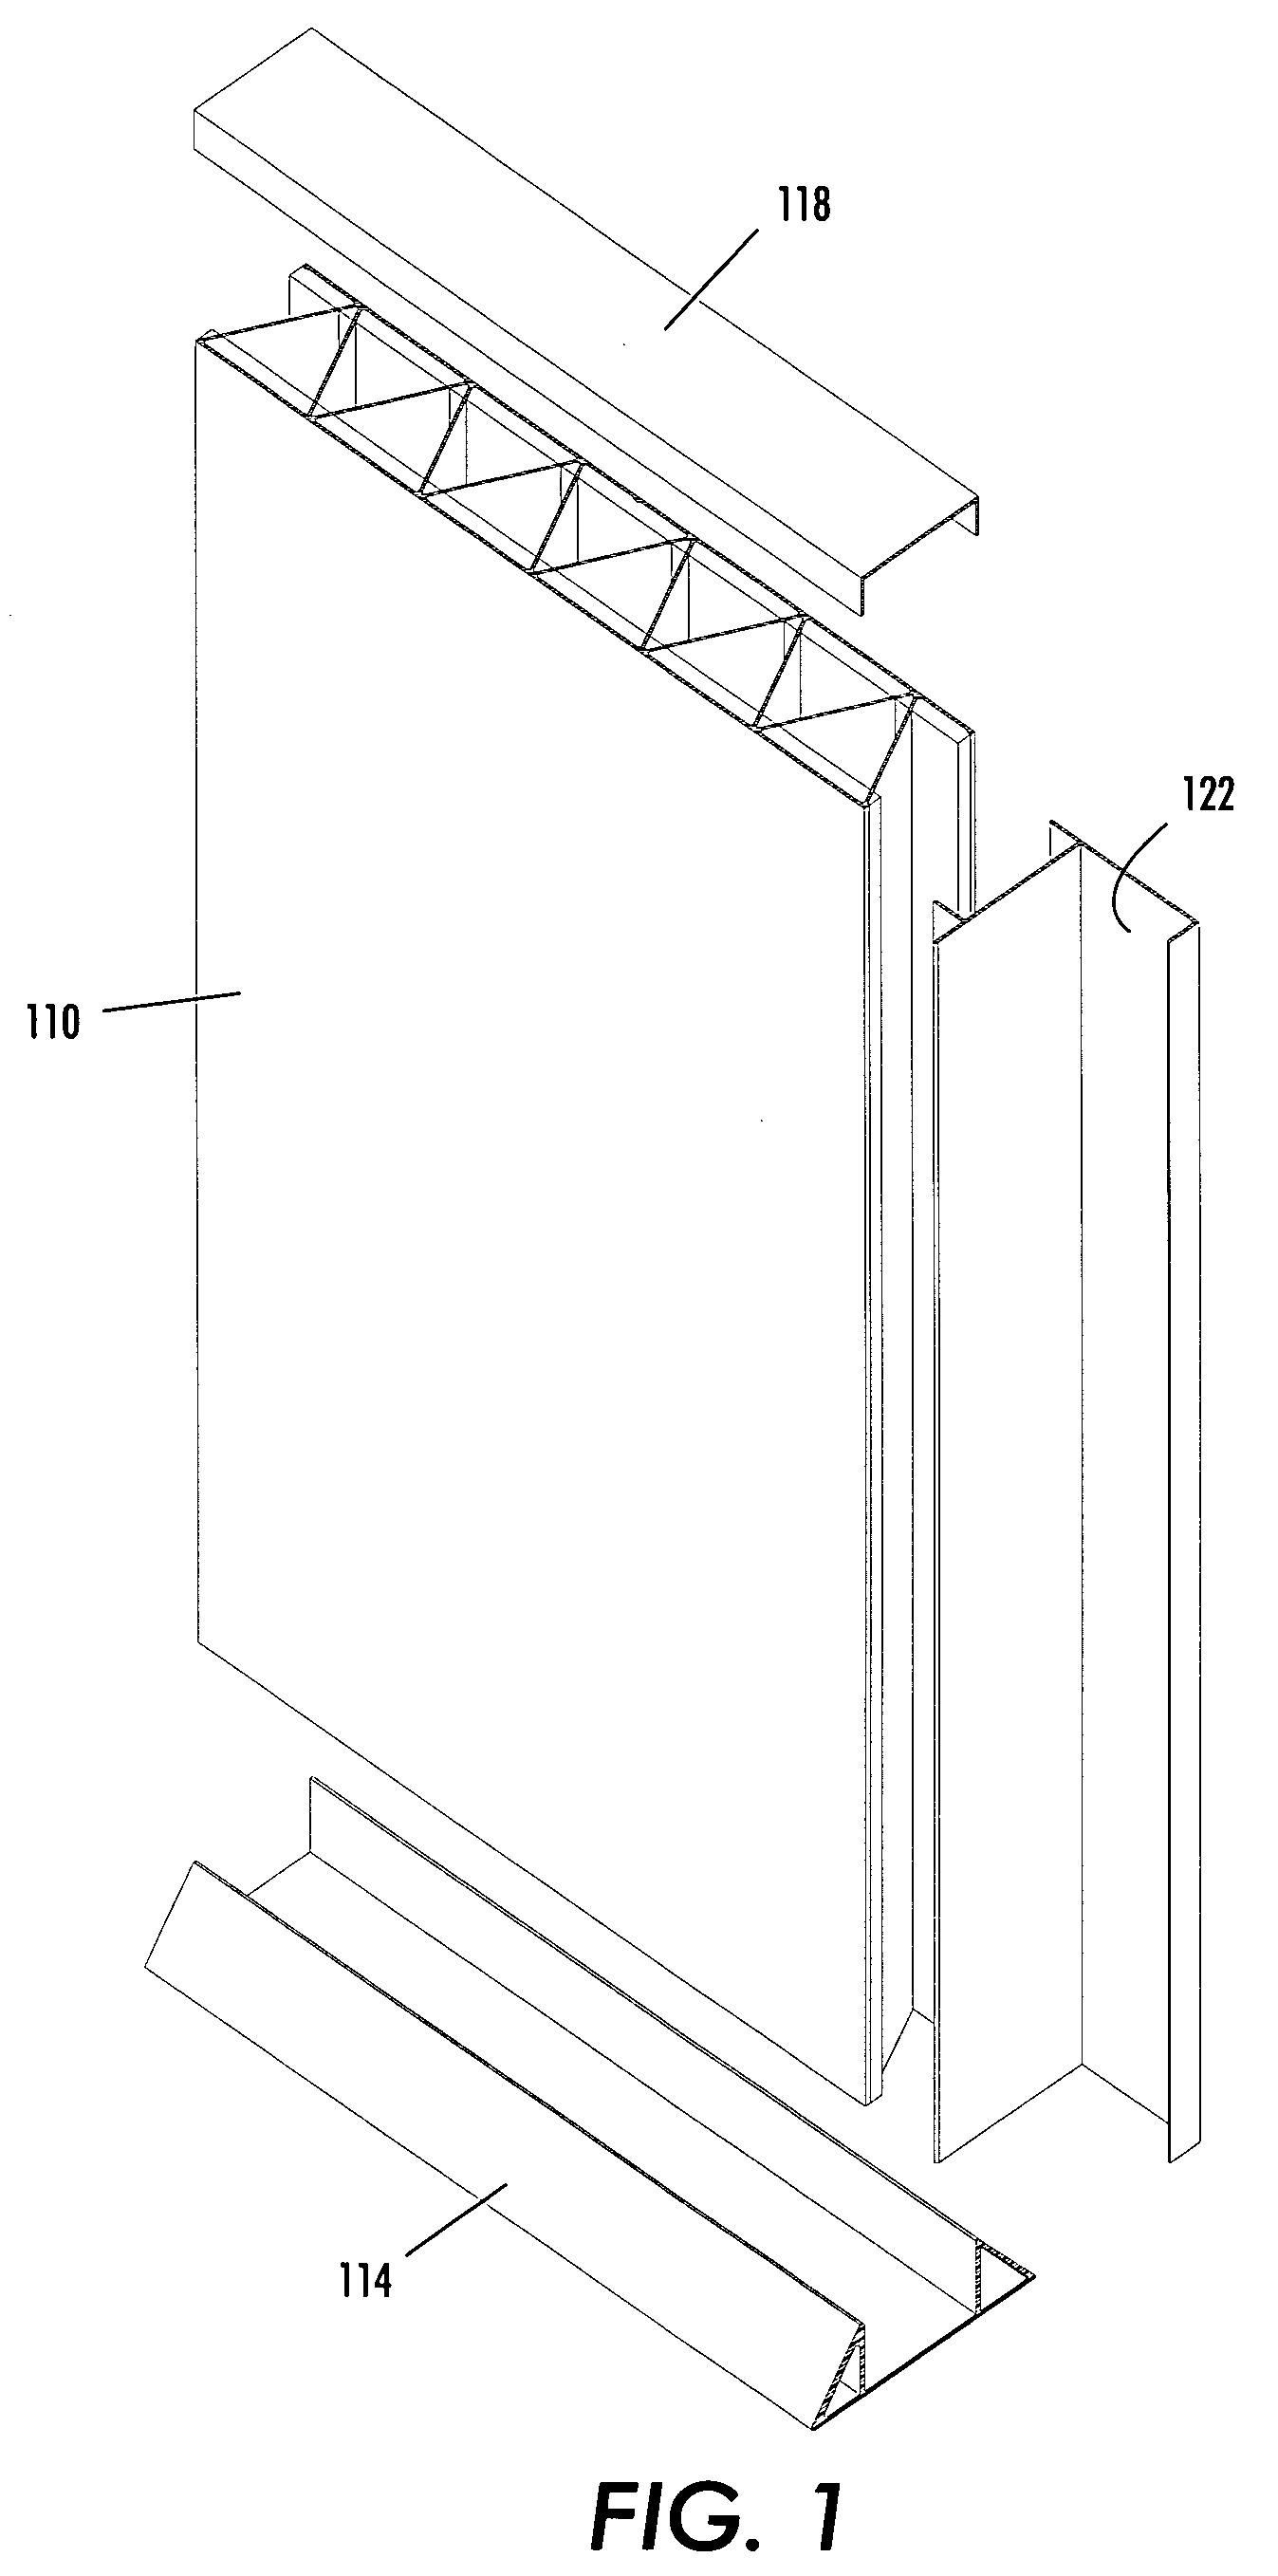 Modular structure for building panels and methods of making and using same